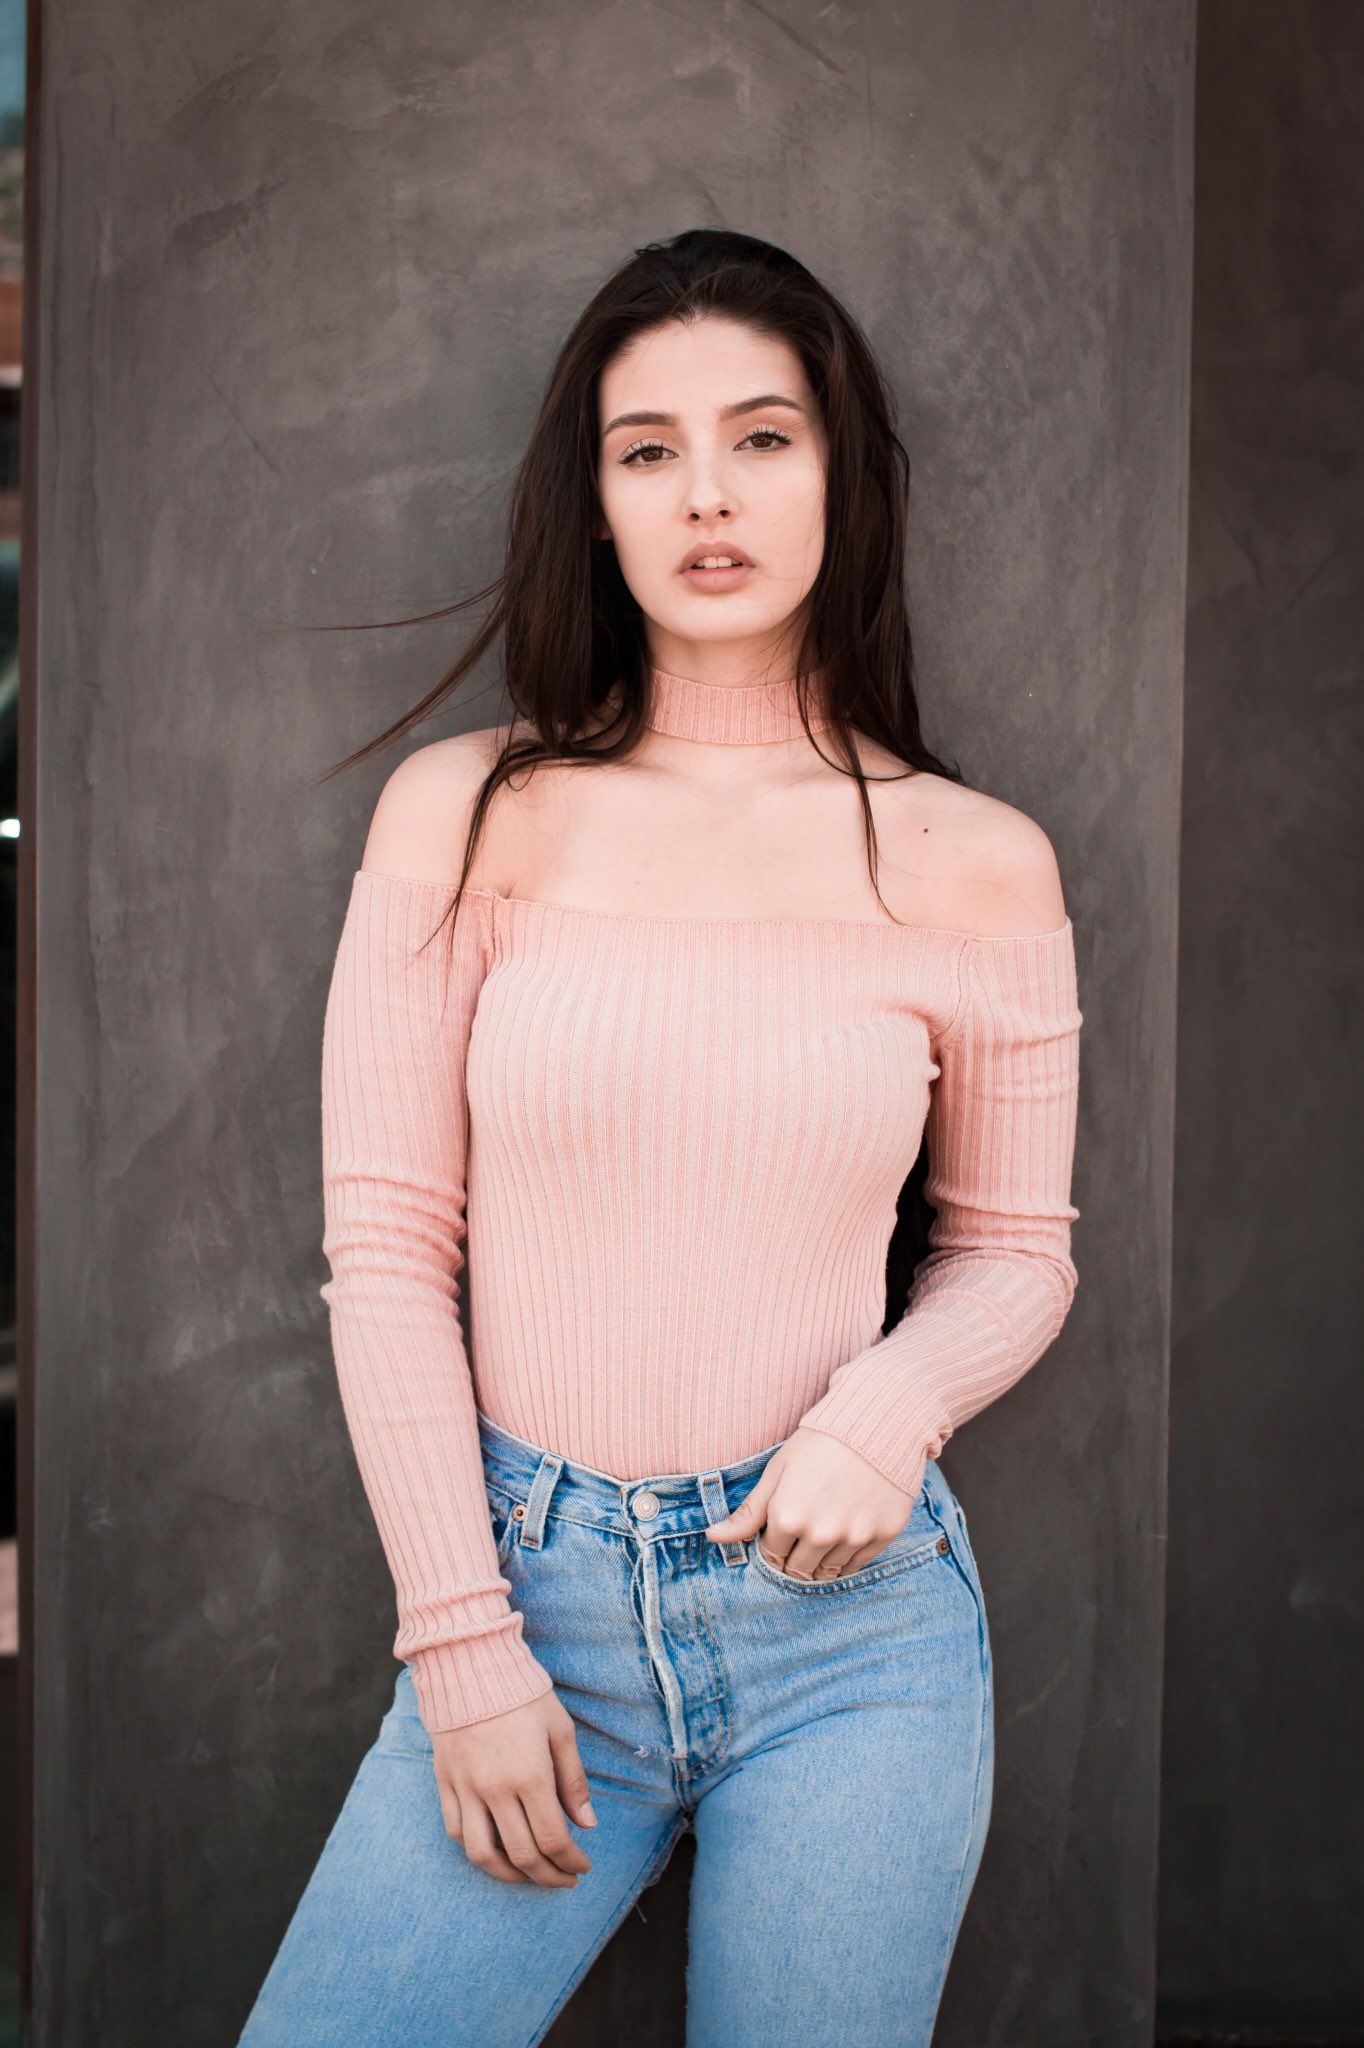 Natalie Gibson Model Pink Sweater Jeans Brunette Long Hair Women Looking At Viewer Open Mouth Brown  1364x2048